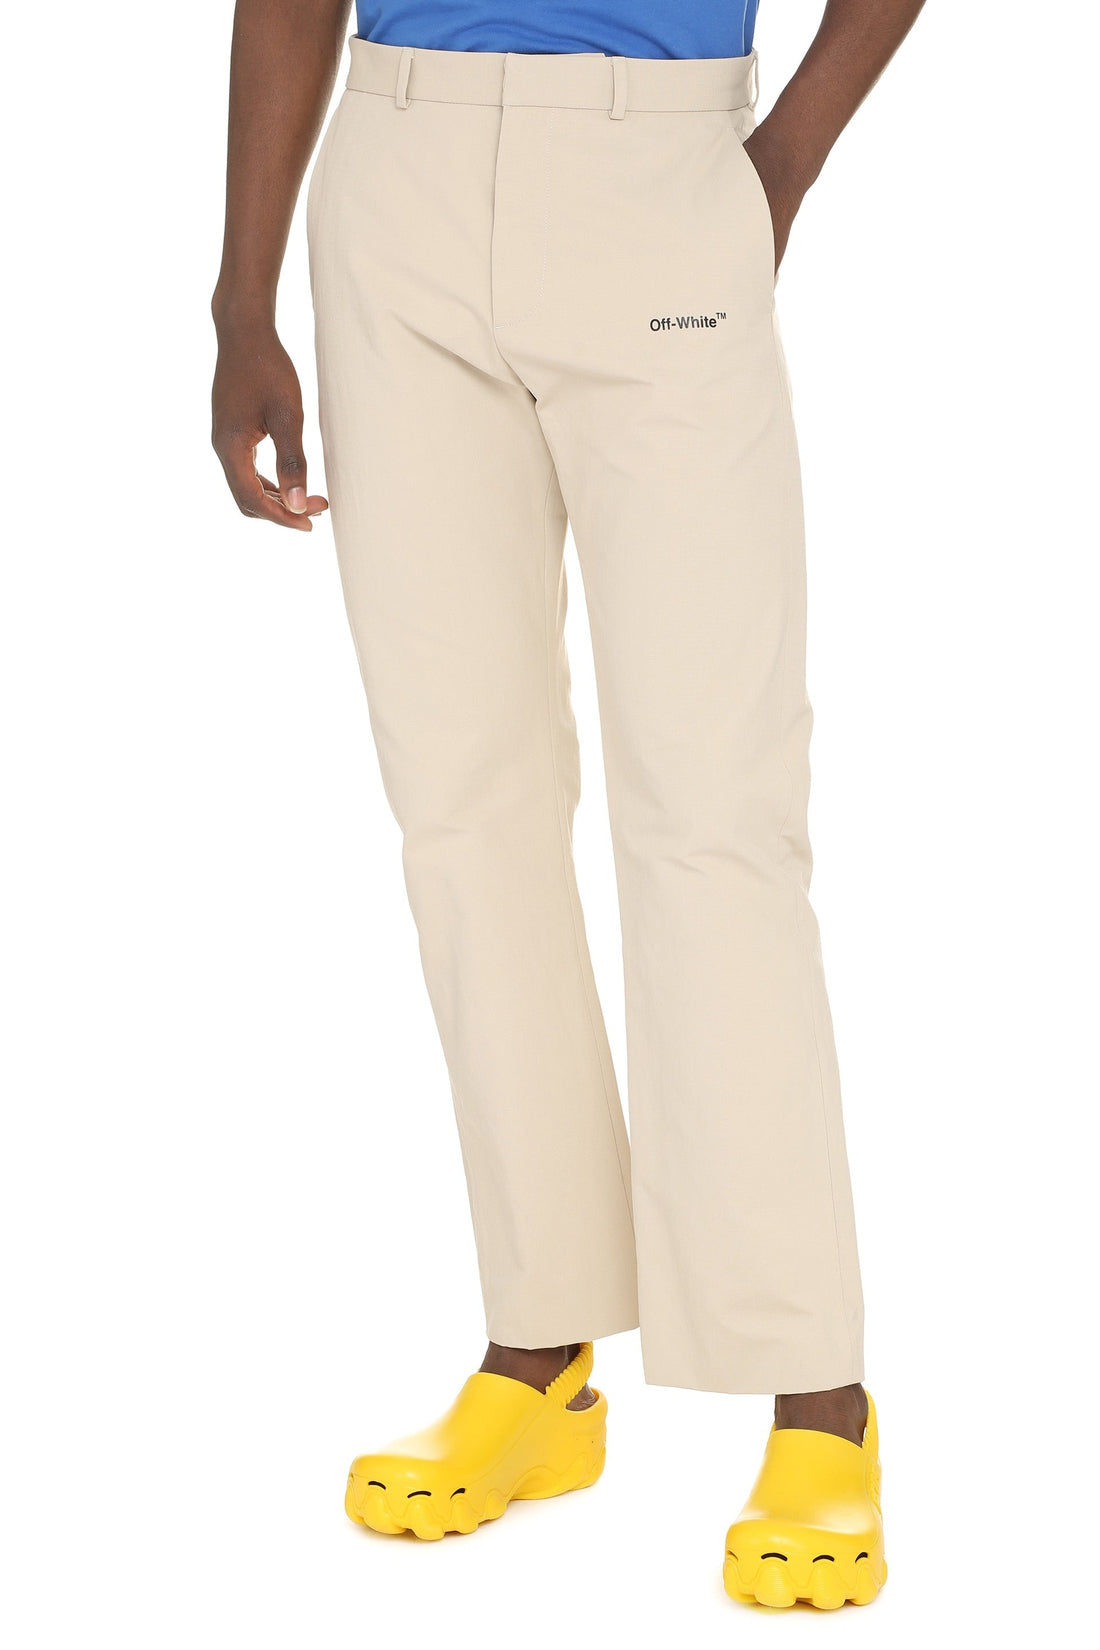 Off-White-OUTLET-SALE-Cotton Chino trousers-ARCHIVIST